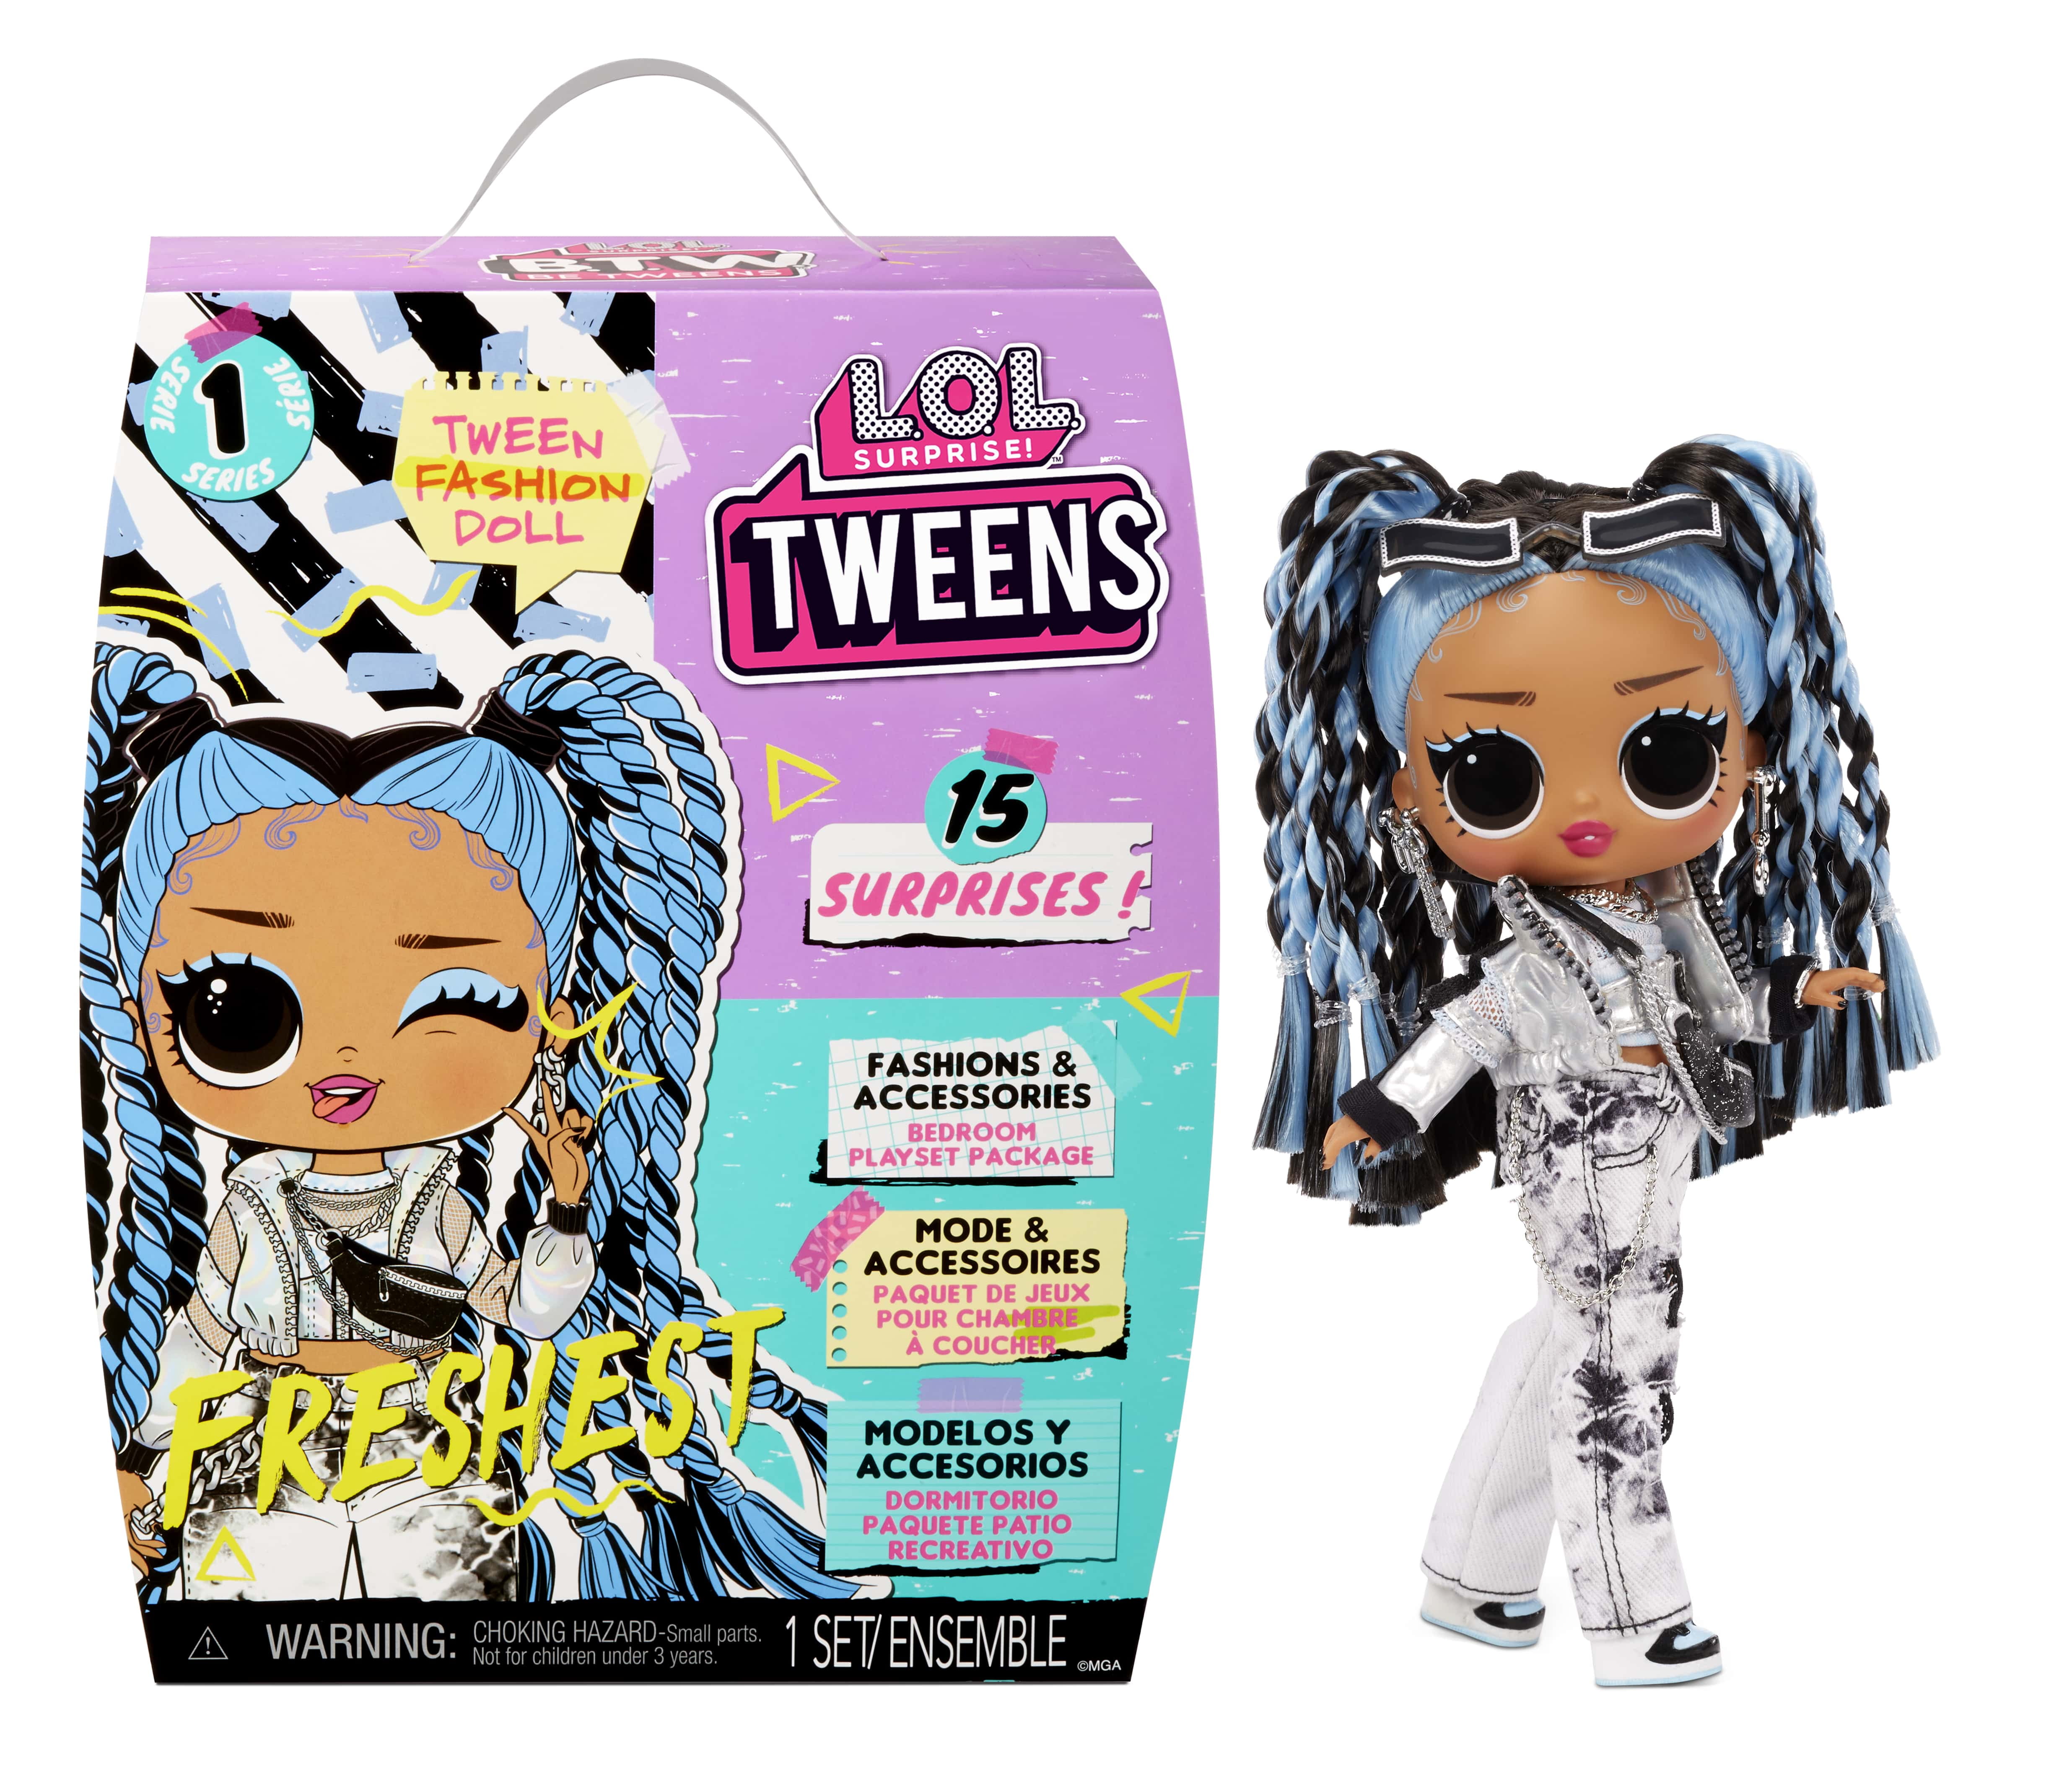 6 inch Doll LOL Surprise Tweens Series 2 Fashion Doll Lexi Gurl with 15 Surprises Including Pink Outfit and Accessories for Fashion Toy Girls Ages 3 and up 